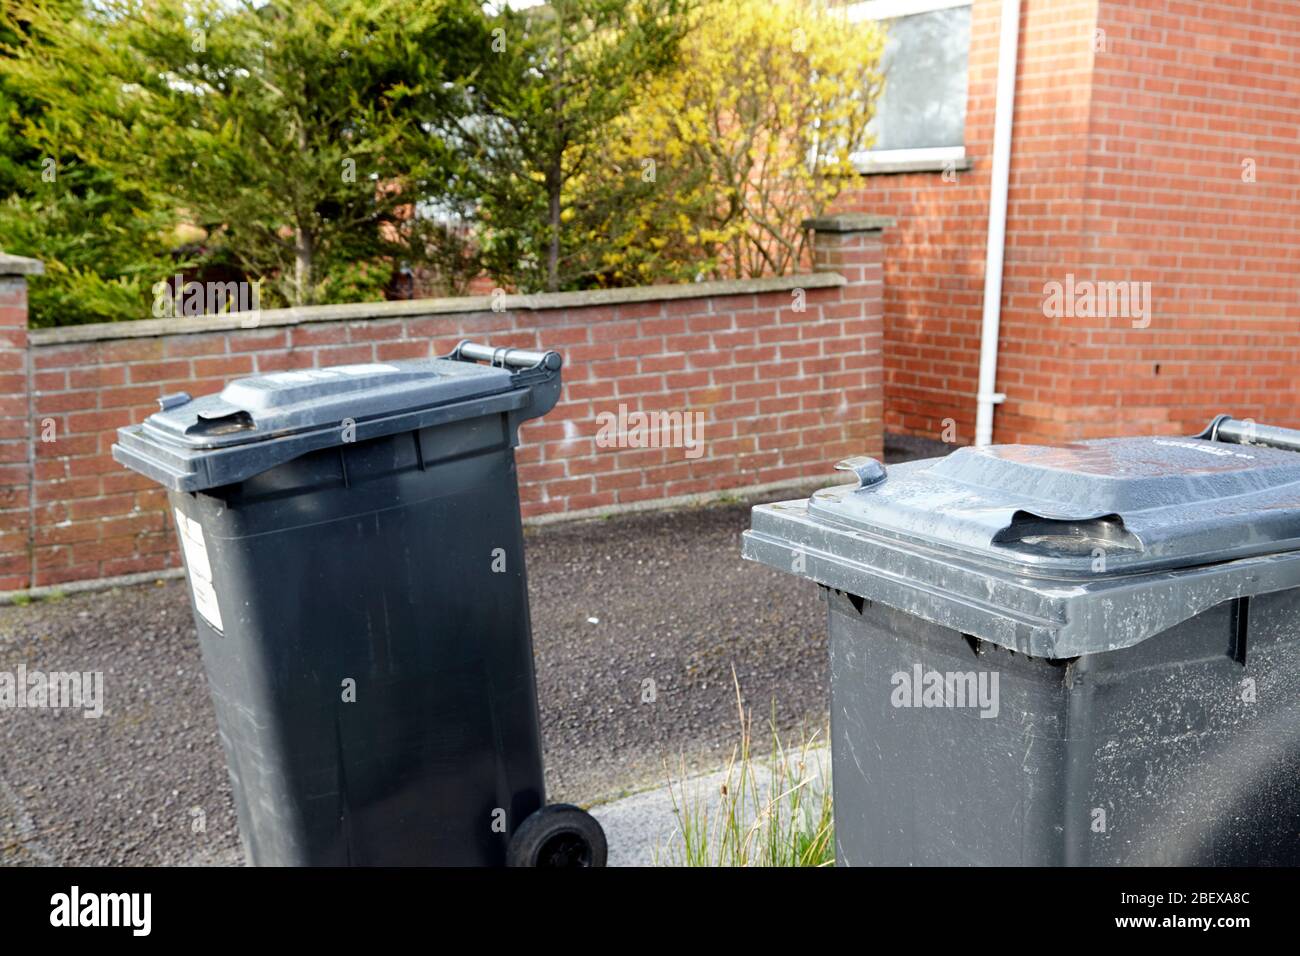 bins left outside semi detached homes in the morning Newtownabbey Northern Ireland UK 2m apart for social distancing Stock Photo